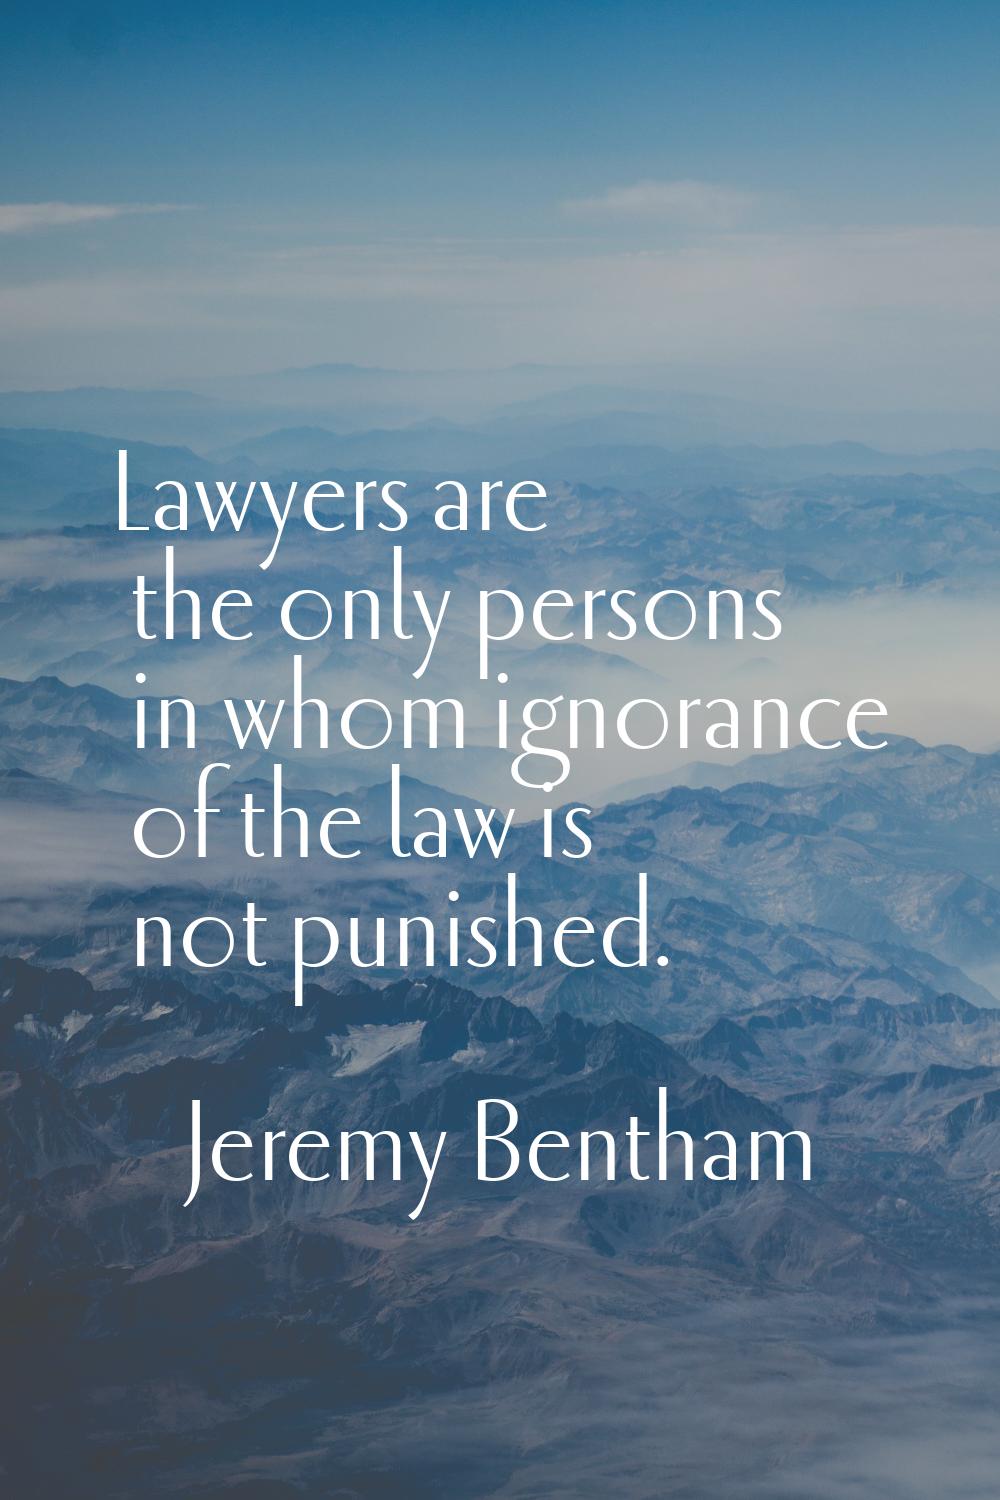 Lawyers are the only persons in whom ignorance of the law is not punished.